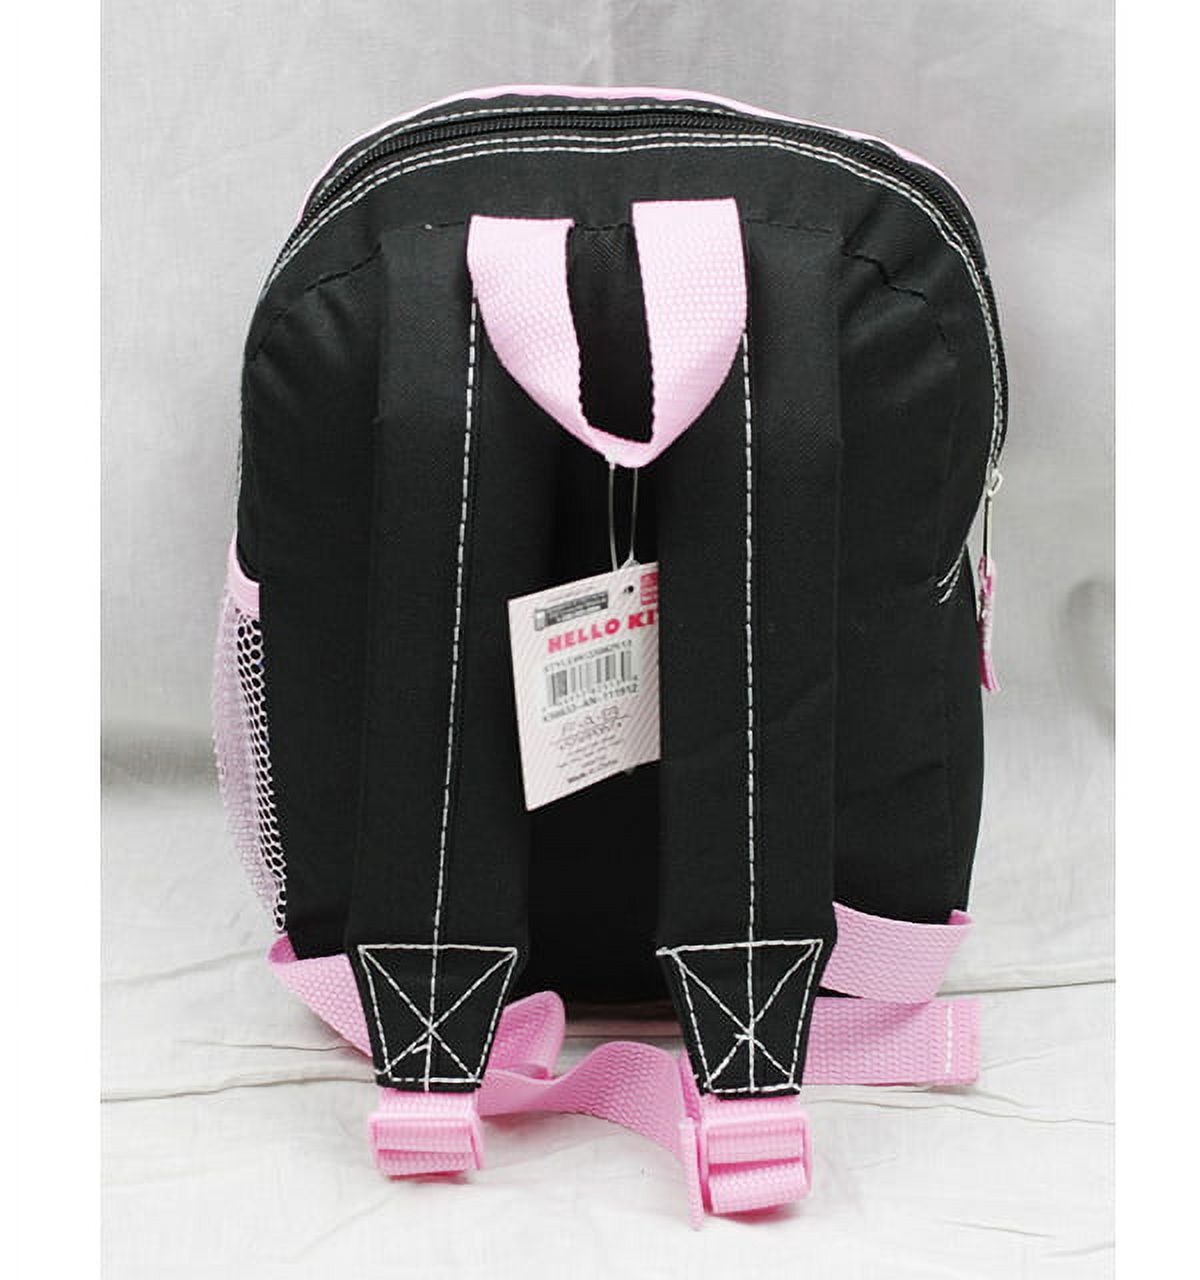 Mini Backpack - - Pink/Red Box New School Bag Book Girls 82513 - image 3 of 3